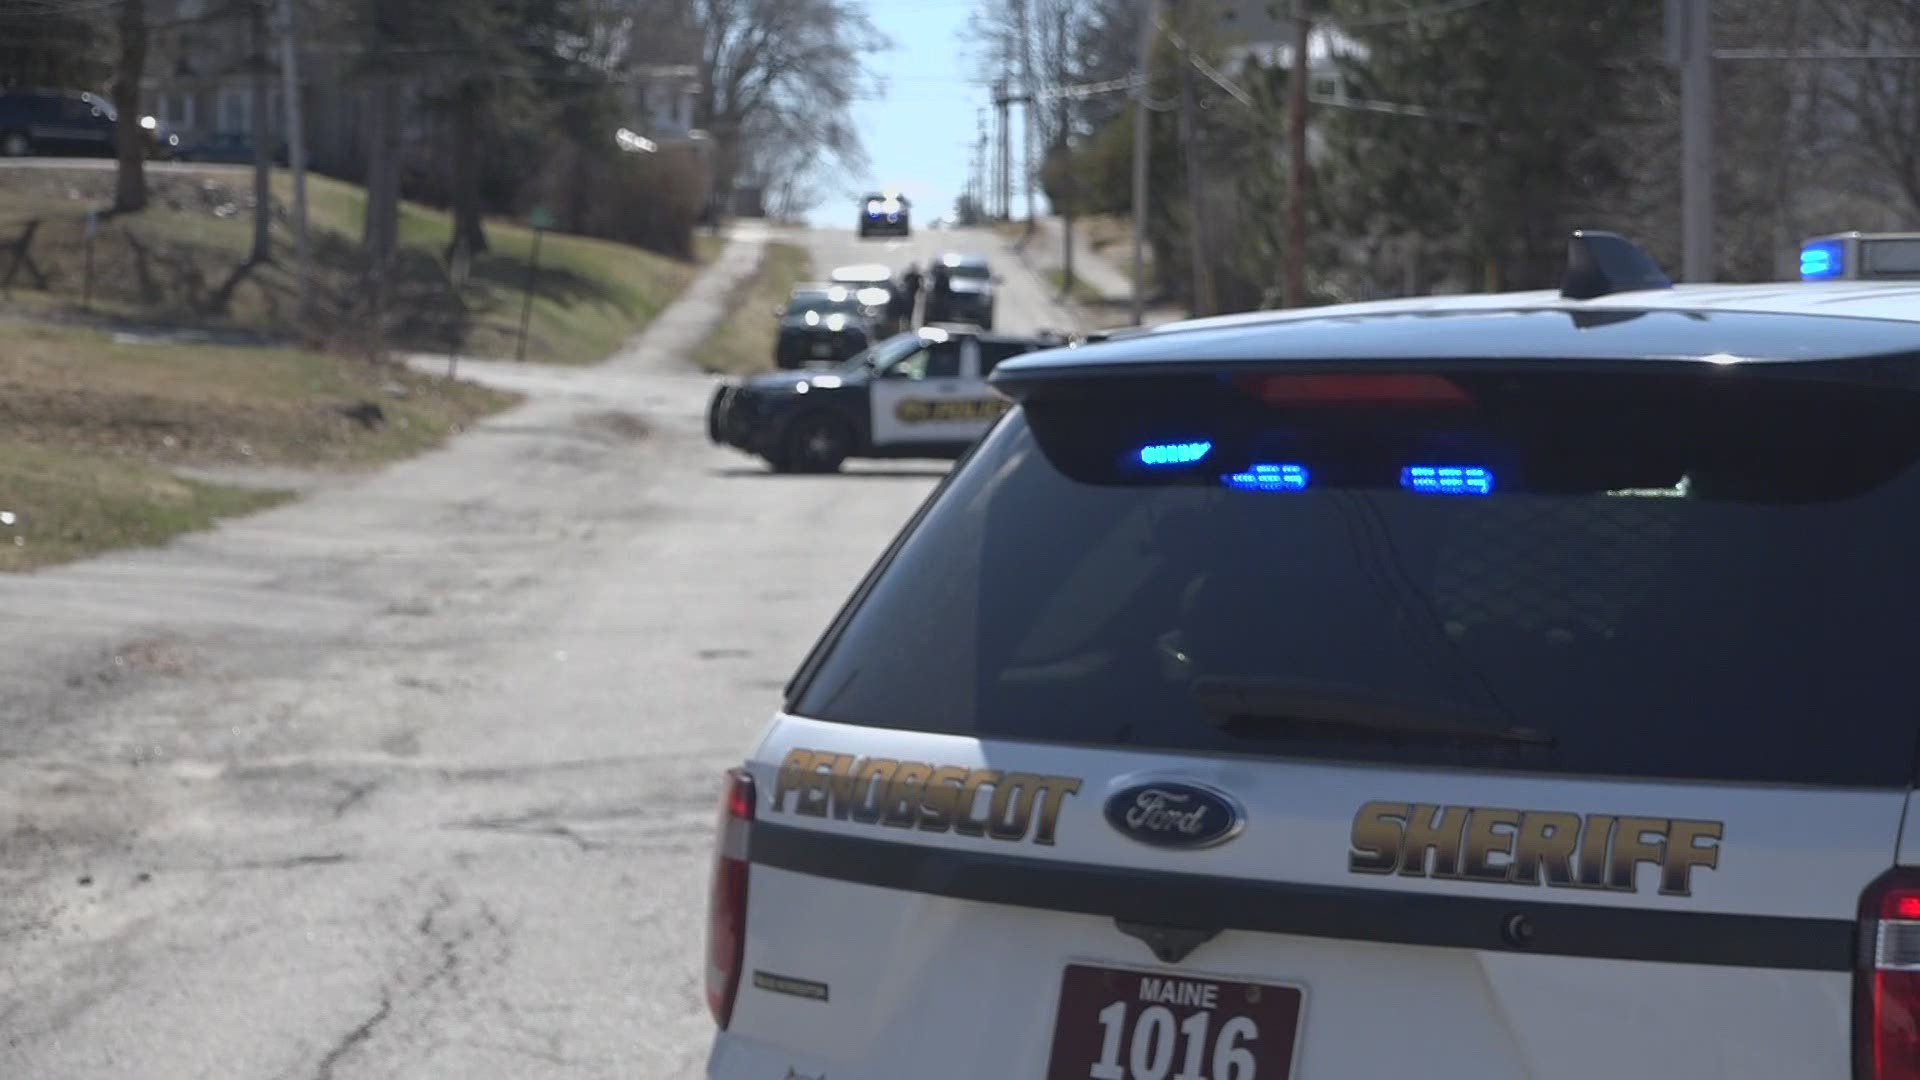 Police responded to the Washington St. area in Brewer on Saturday after receiving a call about a woman allegedly being held hostage inside a home.